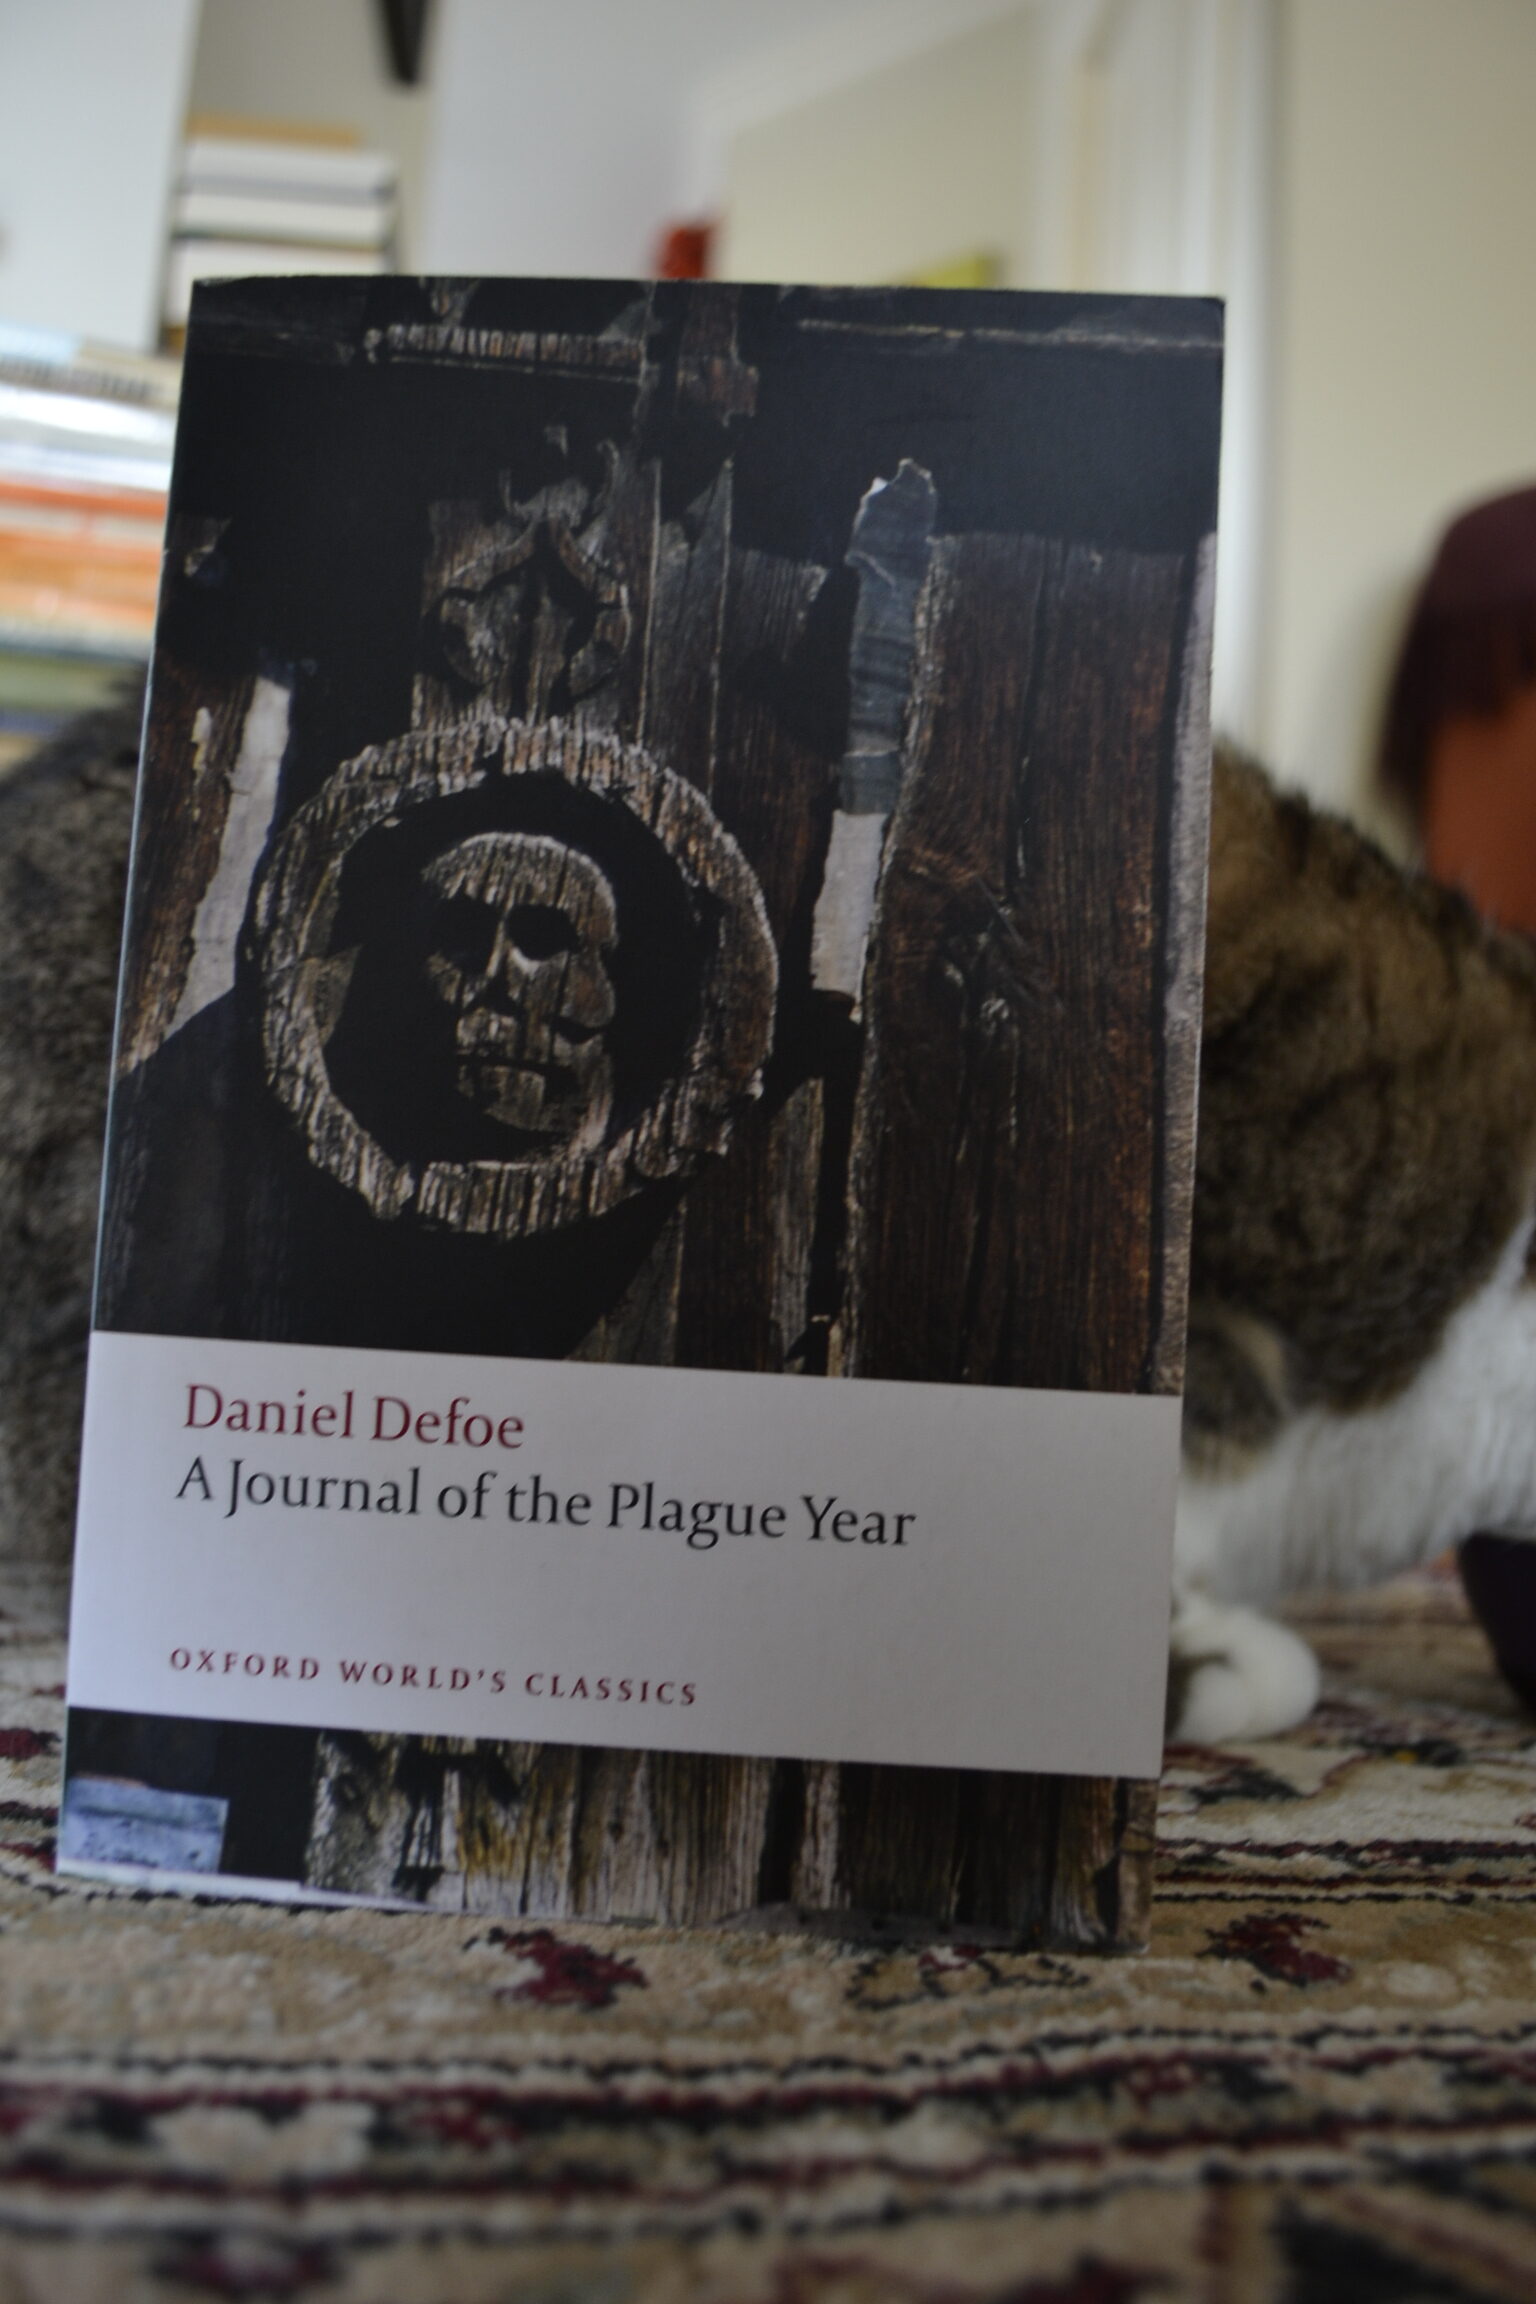 A Journal of a Plague Year and a tabby cat.